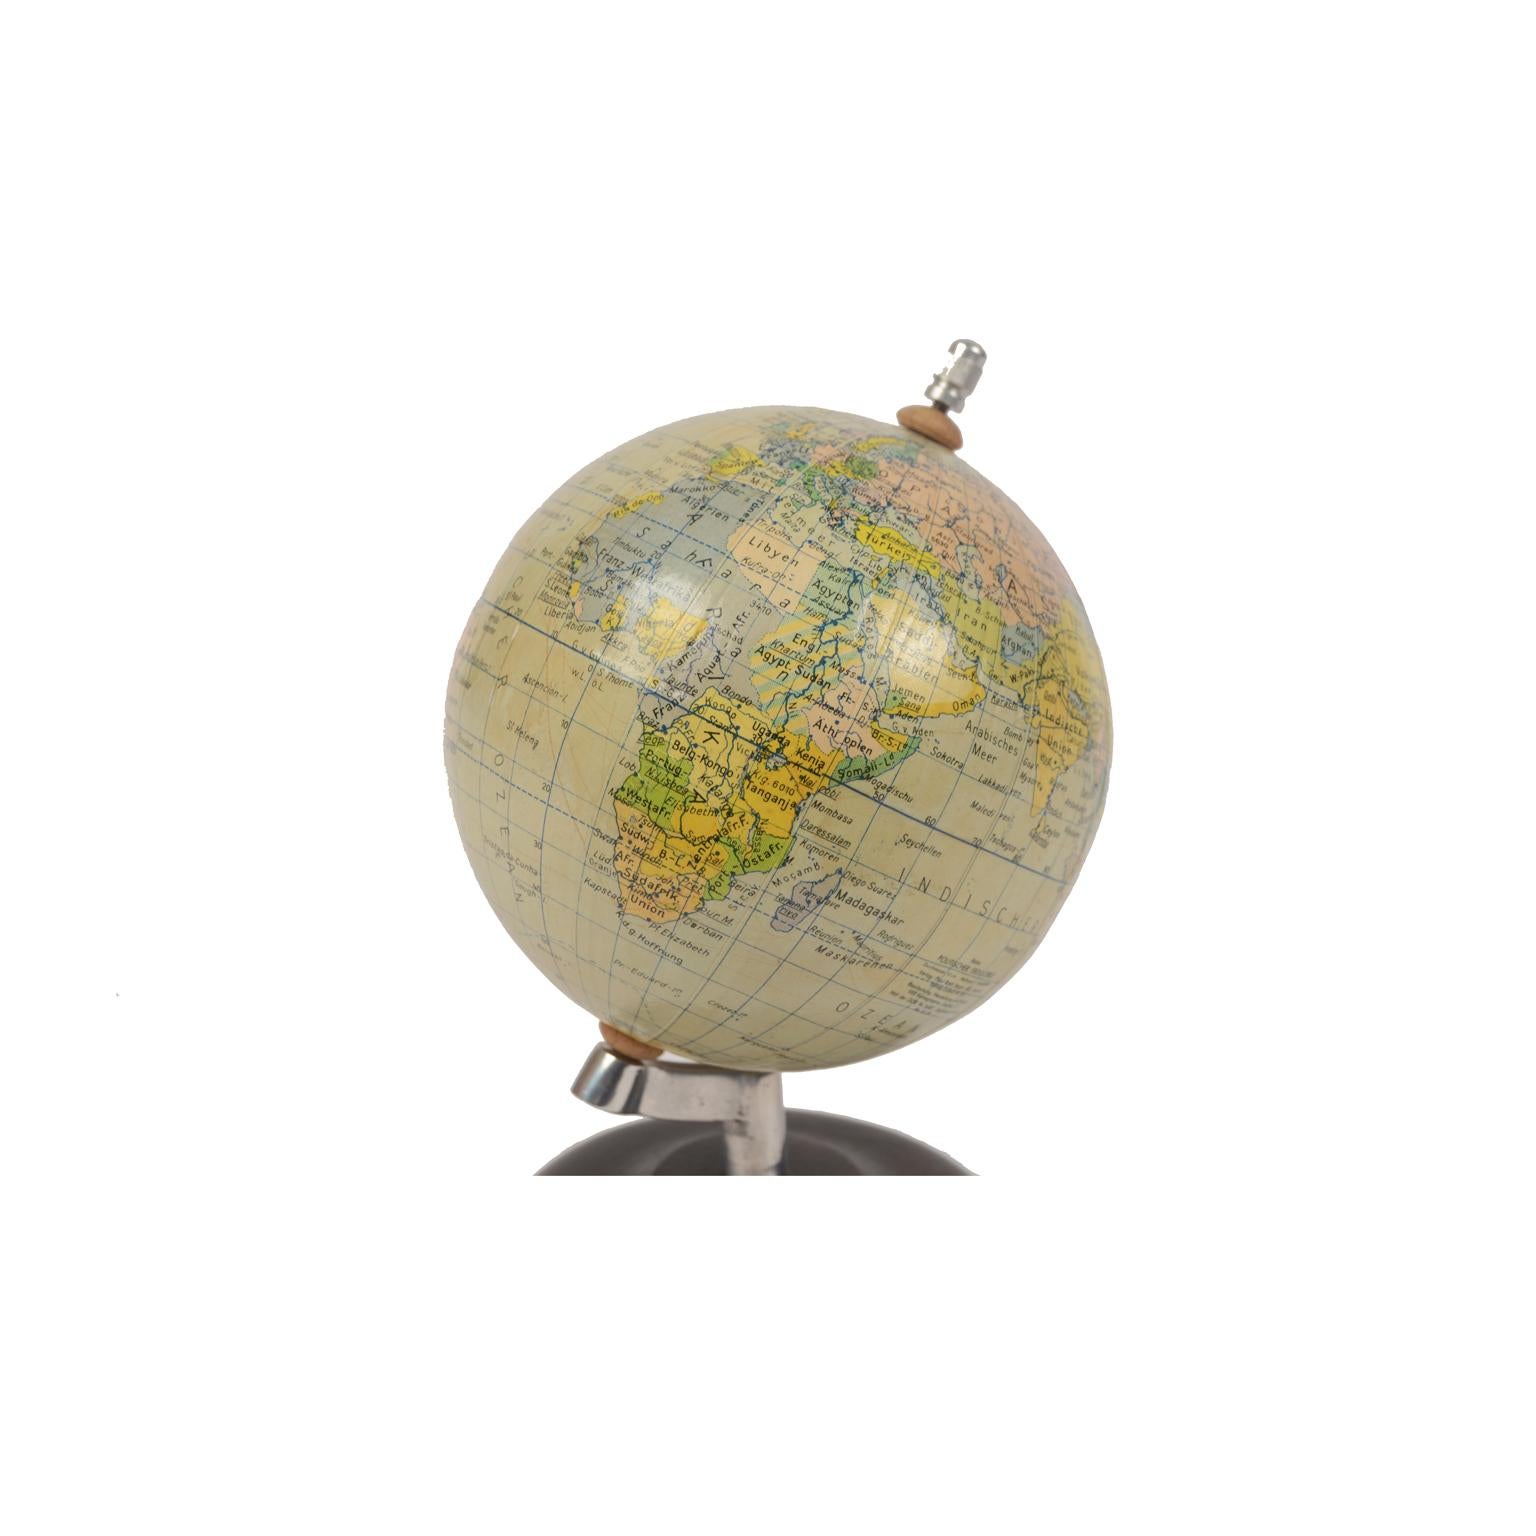 Mid-20th Century German Globe Made in the 1950s with Wooden Base